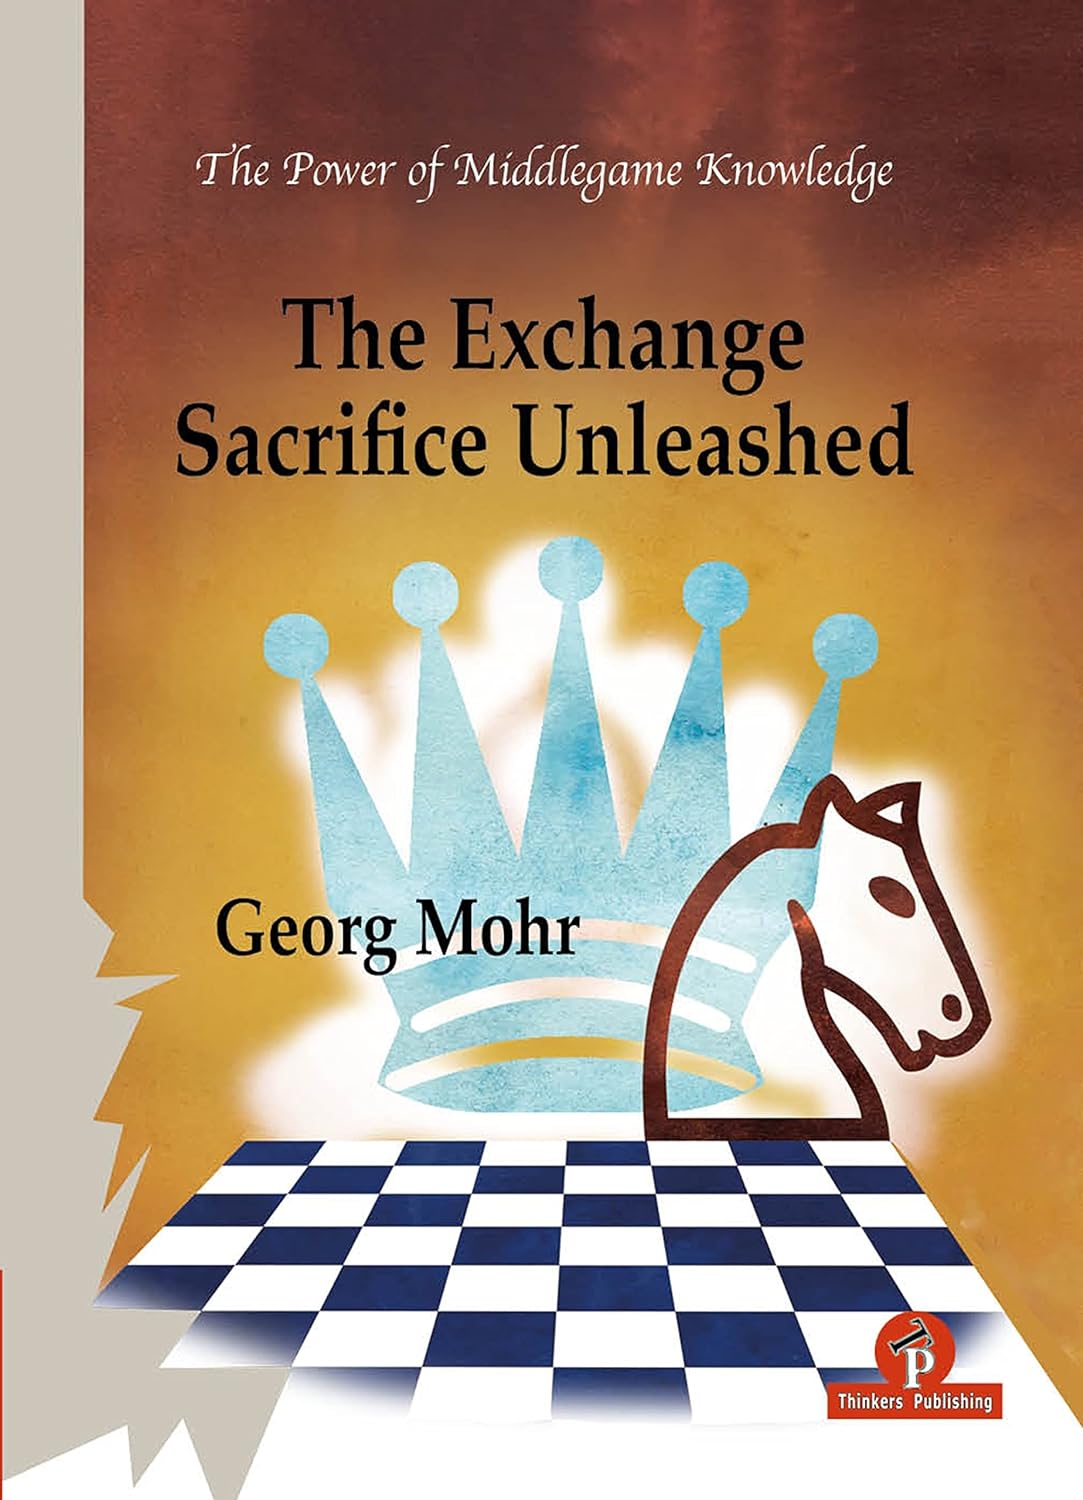 The Exchange Sacrifice Unleashed: Power of Middlegame Knowledge, Georg Mohr, Thinker's Publishing, ISBN-13 ‏ : ‎ 978-9464201864